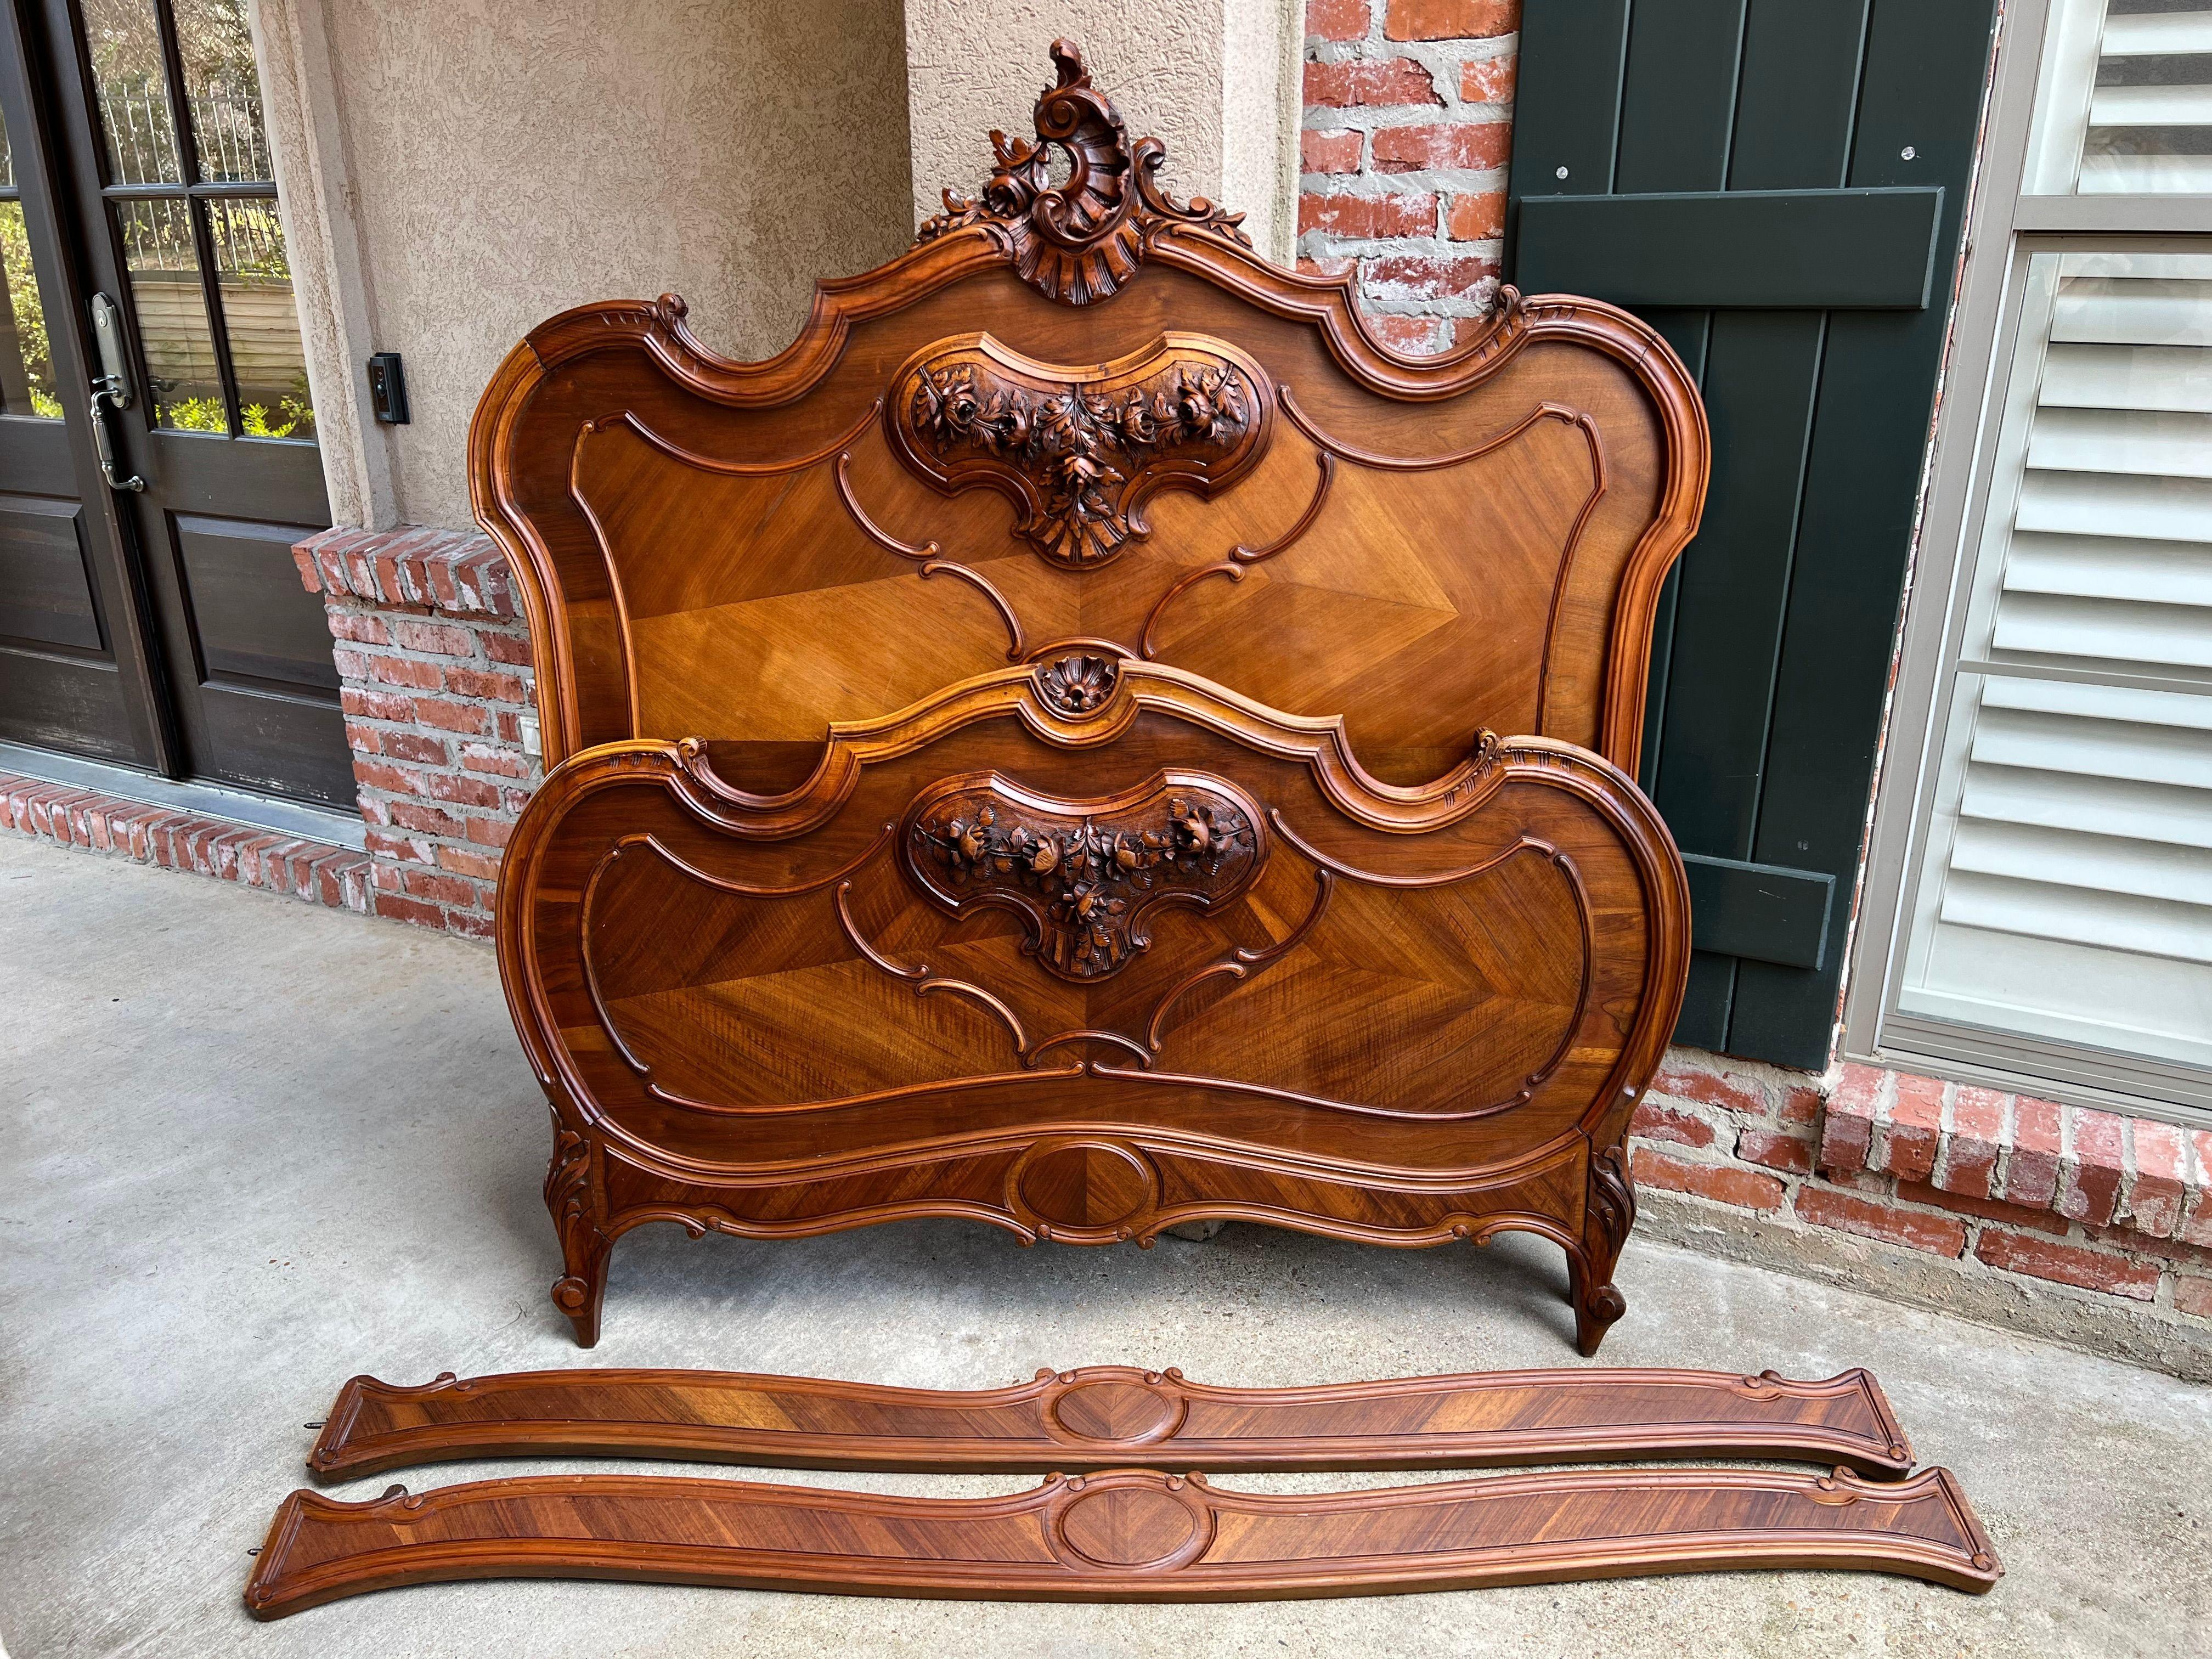 19th century French Louis XV Bed Carved Walnut Rococo European Size with Rails.
Direct from France, a gorgeous antique French bed, with headboard, footboard AND original rails!

With a glamourous serpentine form, the headboard features a carved